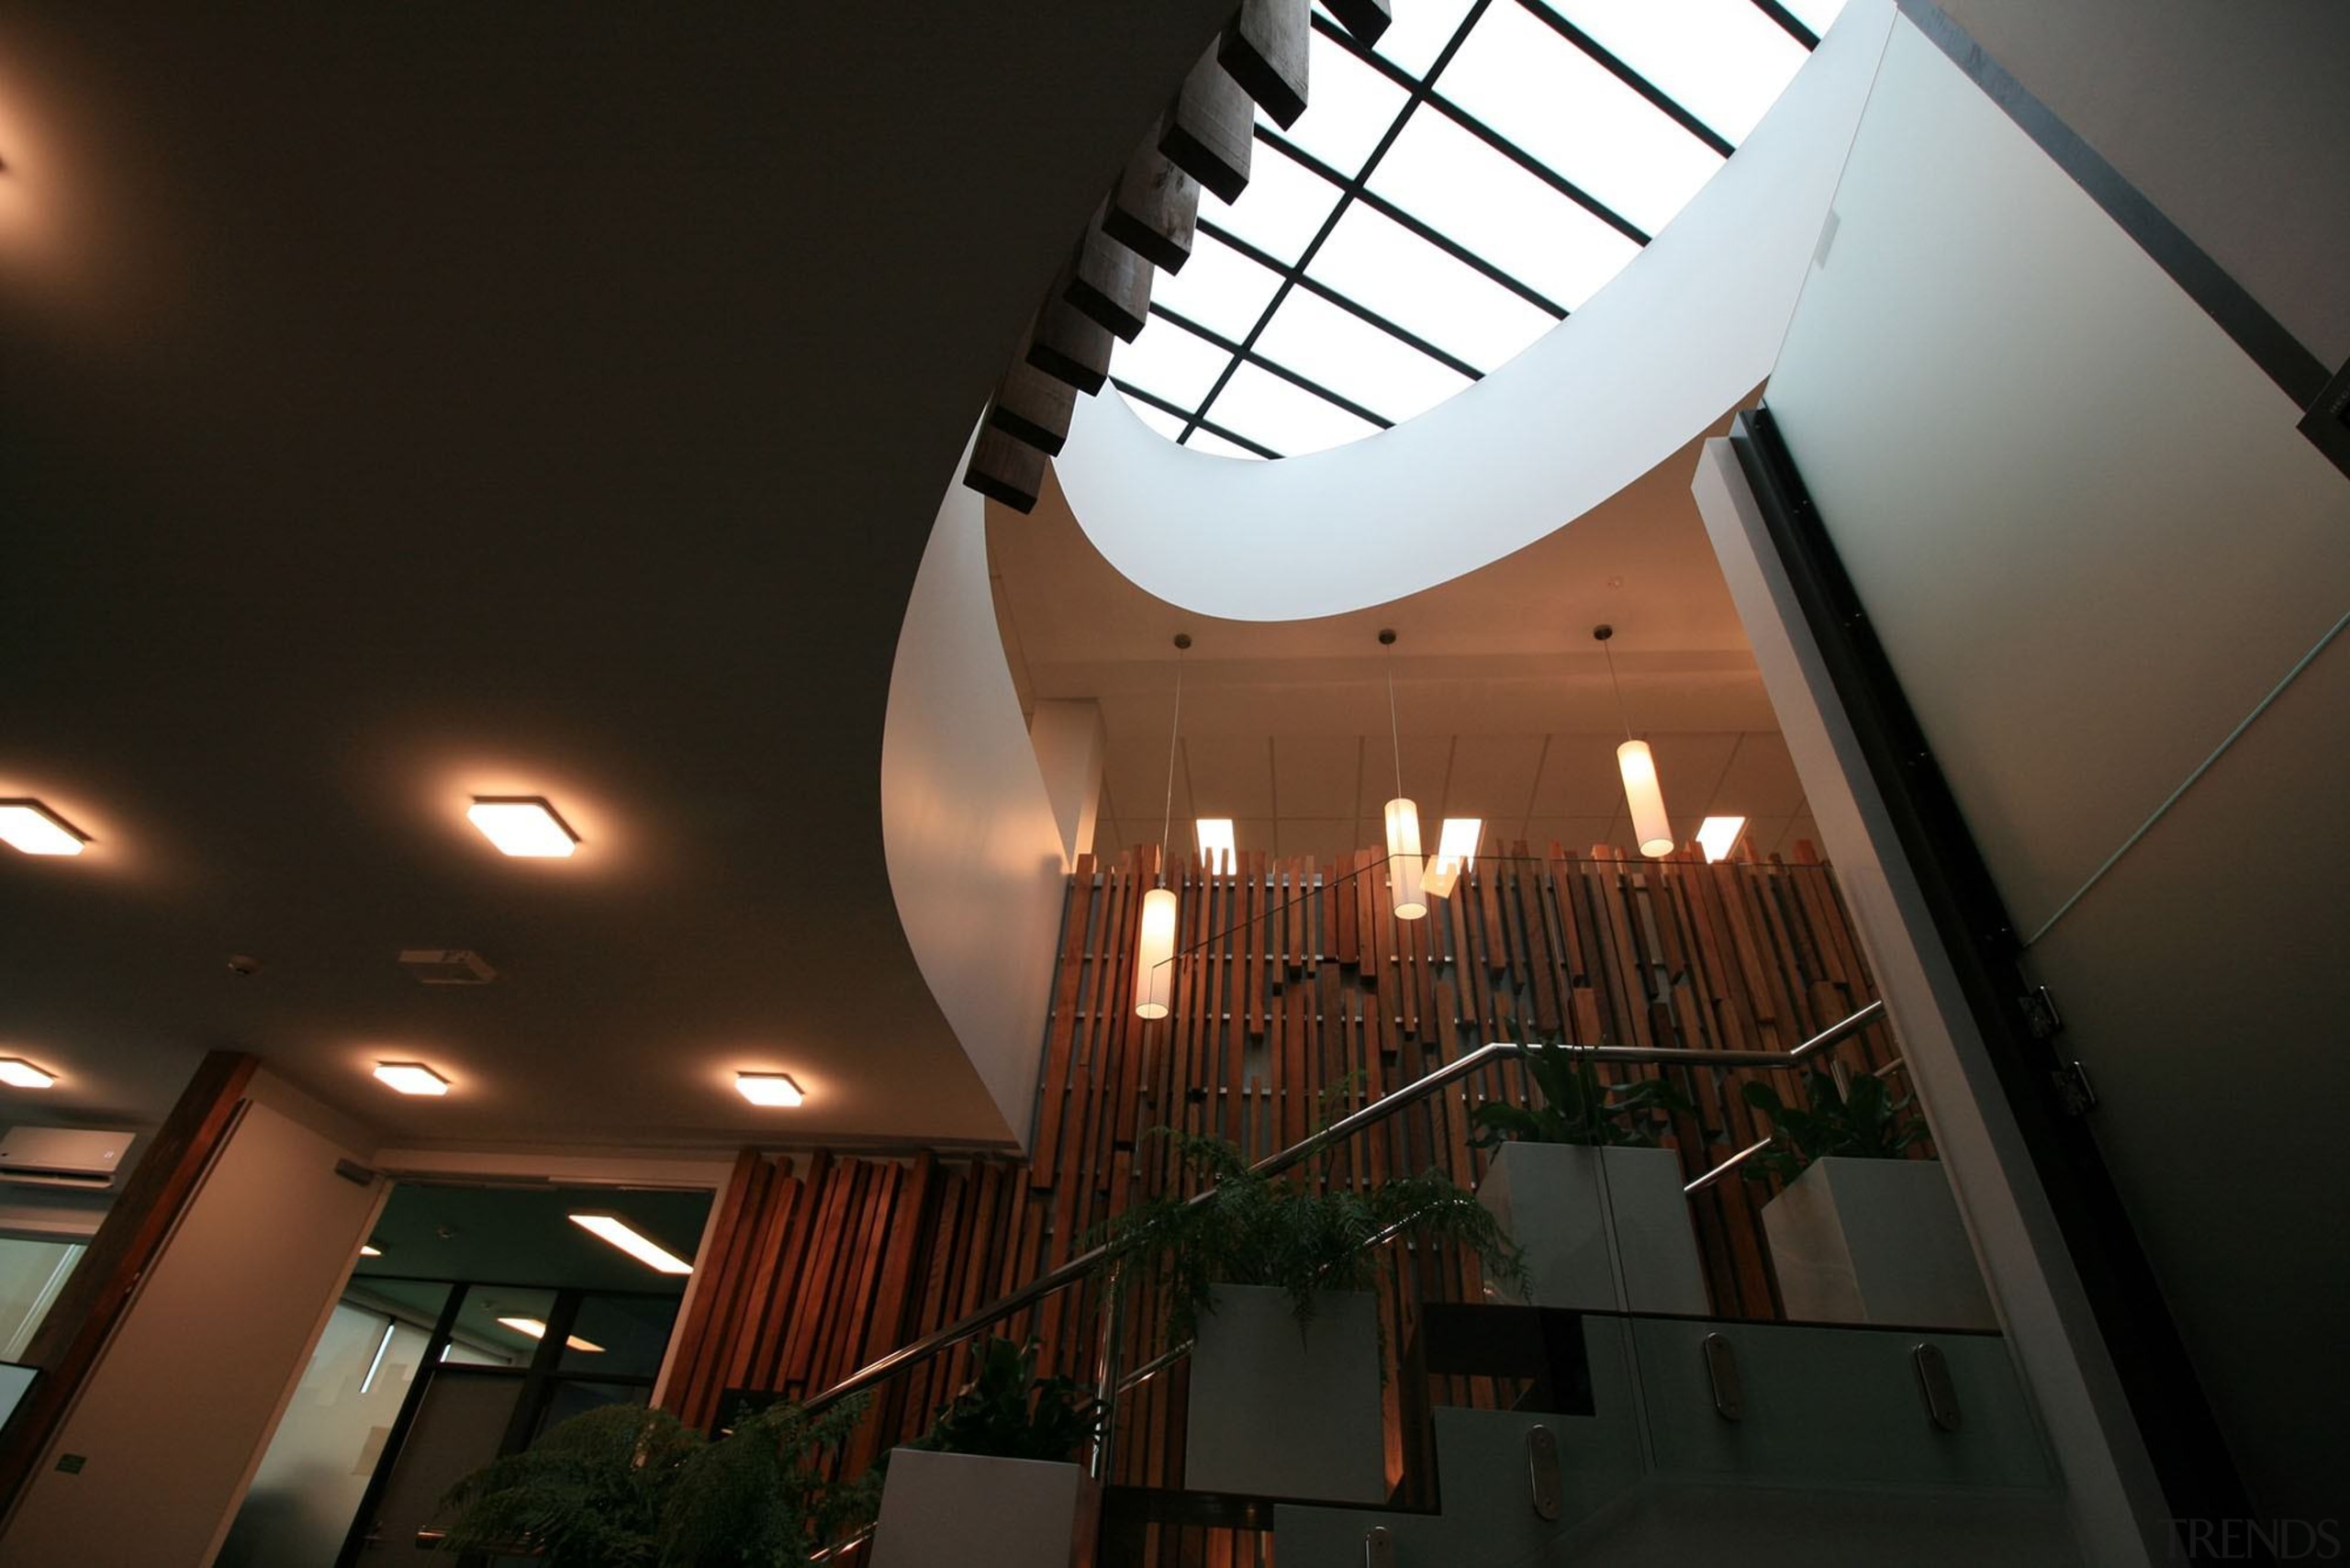 New Zealand Architecture Awards architecture, ceiling, daylighting, interior design, lighting, black, brown